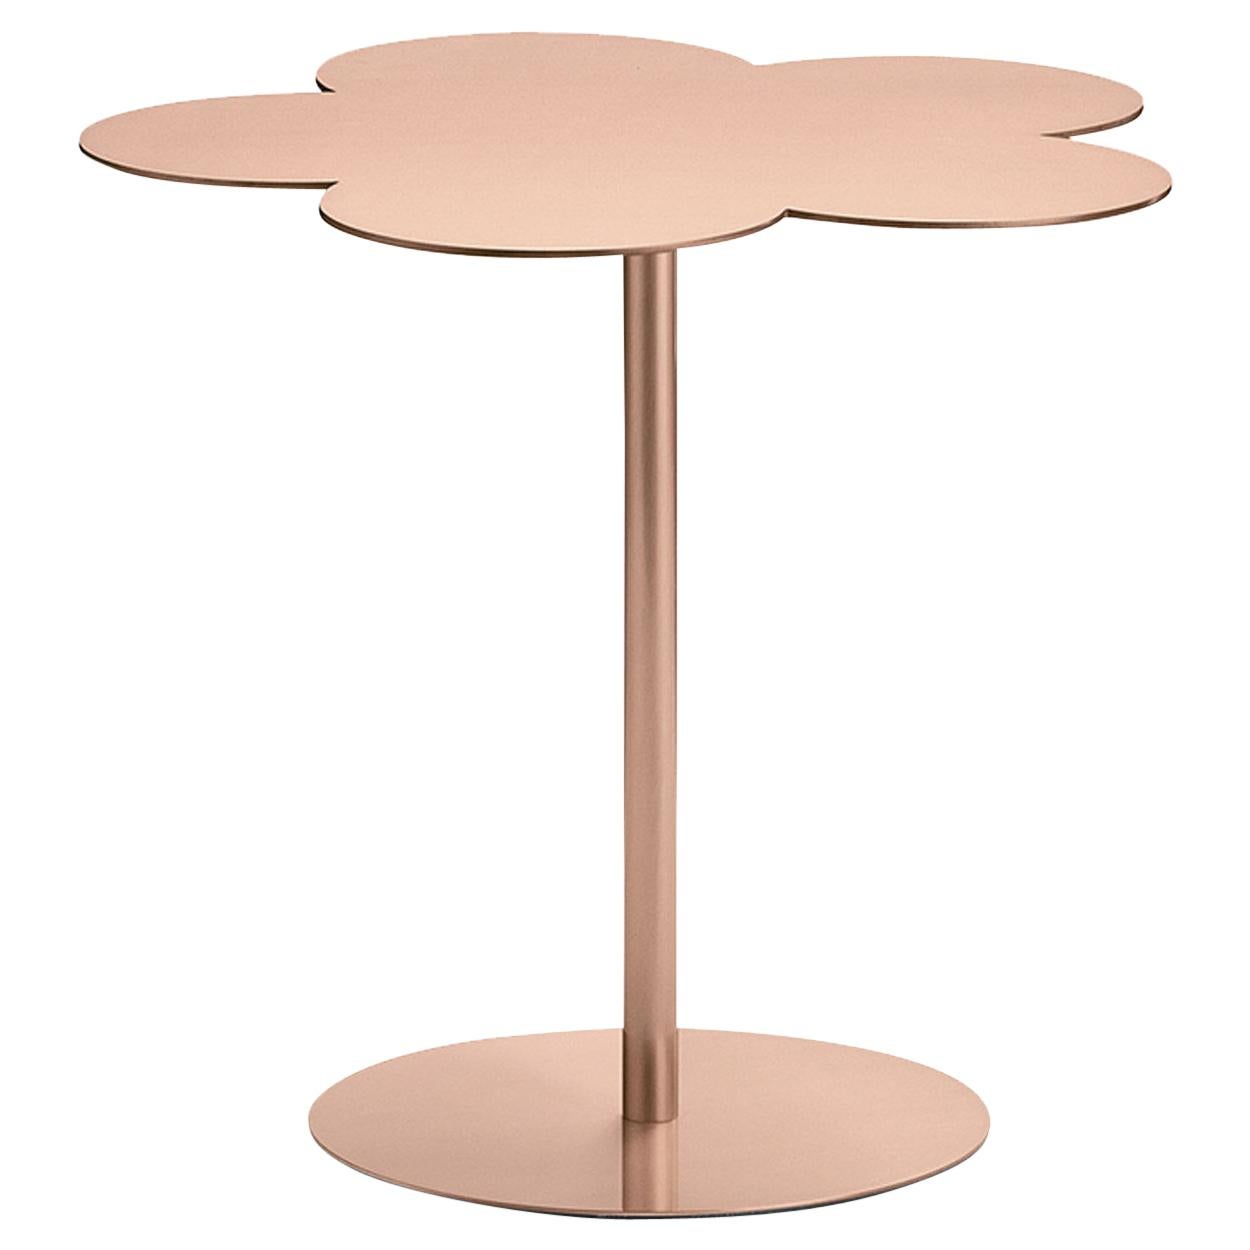 Ghidini 1961 - Flowers Copper Large Side Table By Stefano Giovannoni